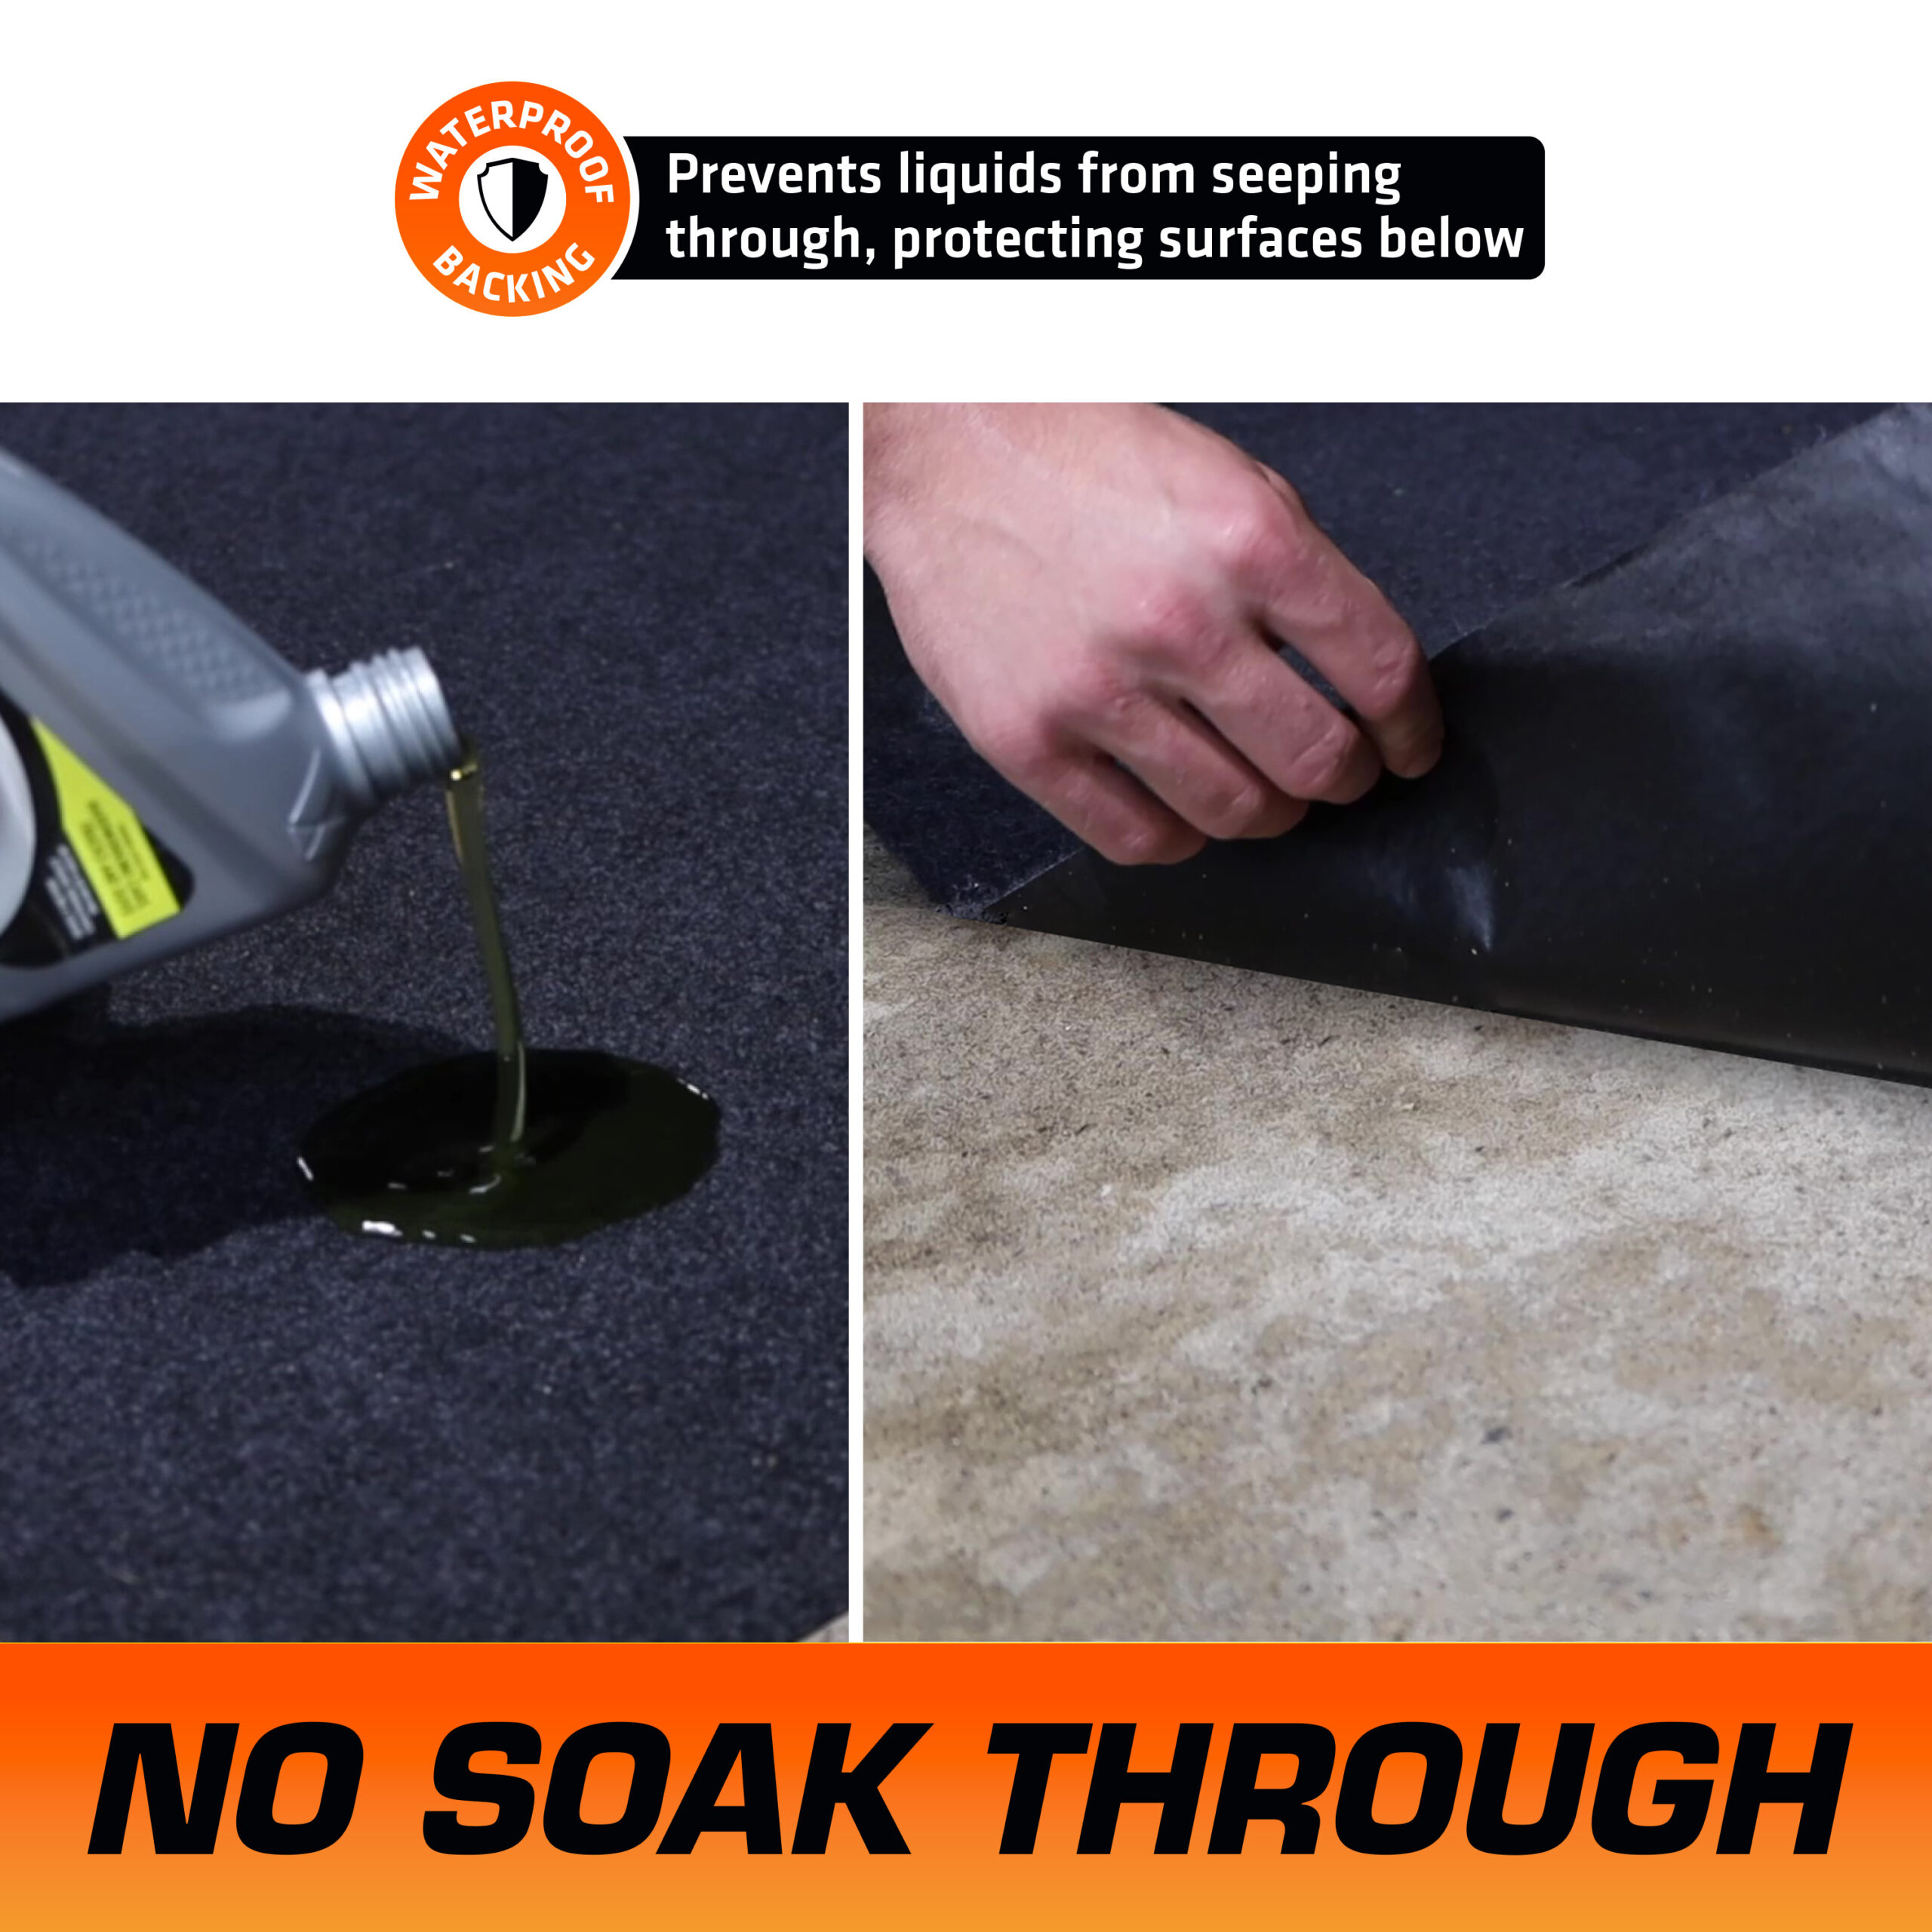 https://drymate.com/wp-content/uploads/2020/01/3-Armor-All-Oil-Spill-Mat-absrobent-drip-floor-surface-garage-protection-pad-waterproof-reusable-durable-maintenance-scaled.jpg